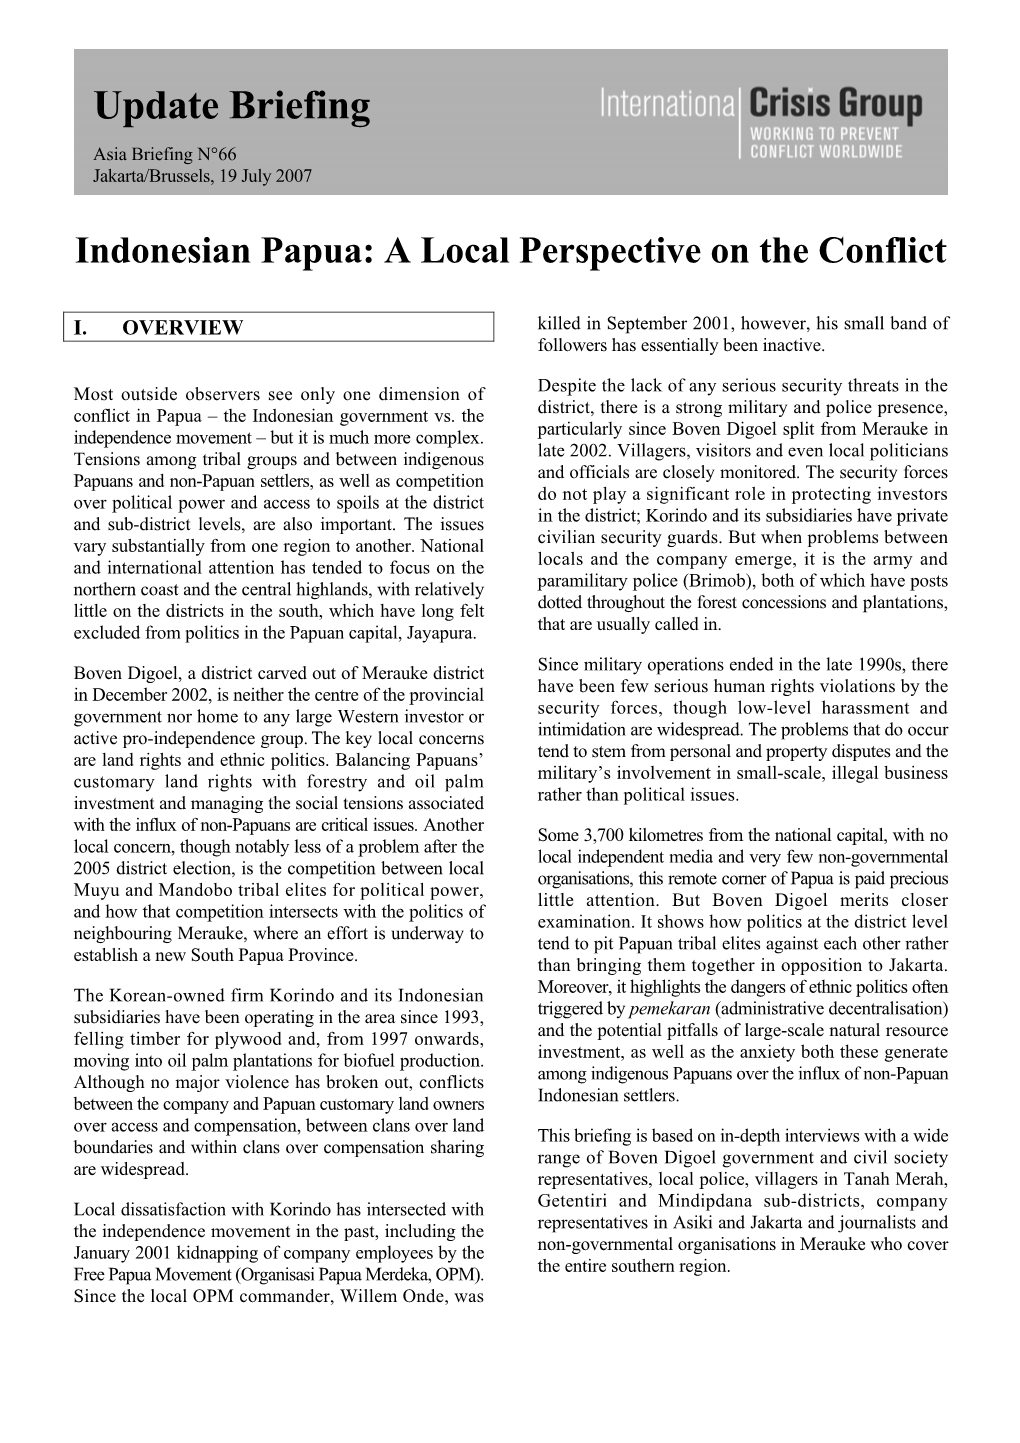 Asia Briefing, Nr. 66: Indonesian Papua